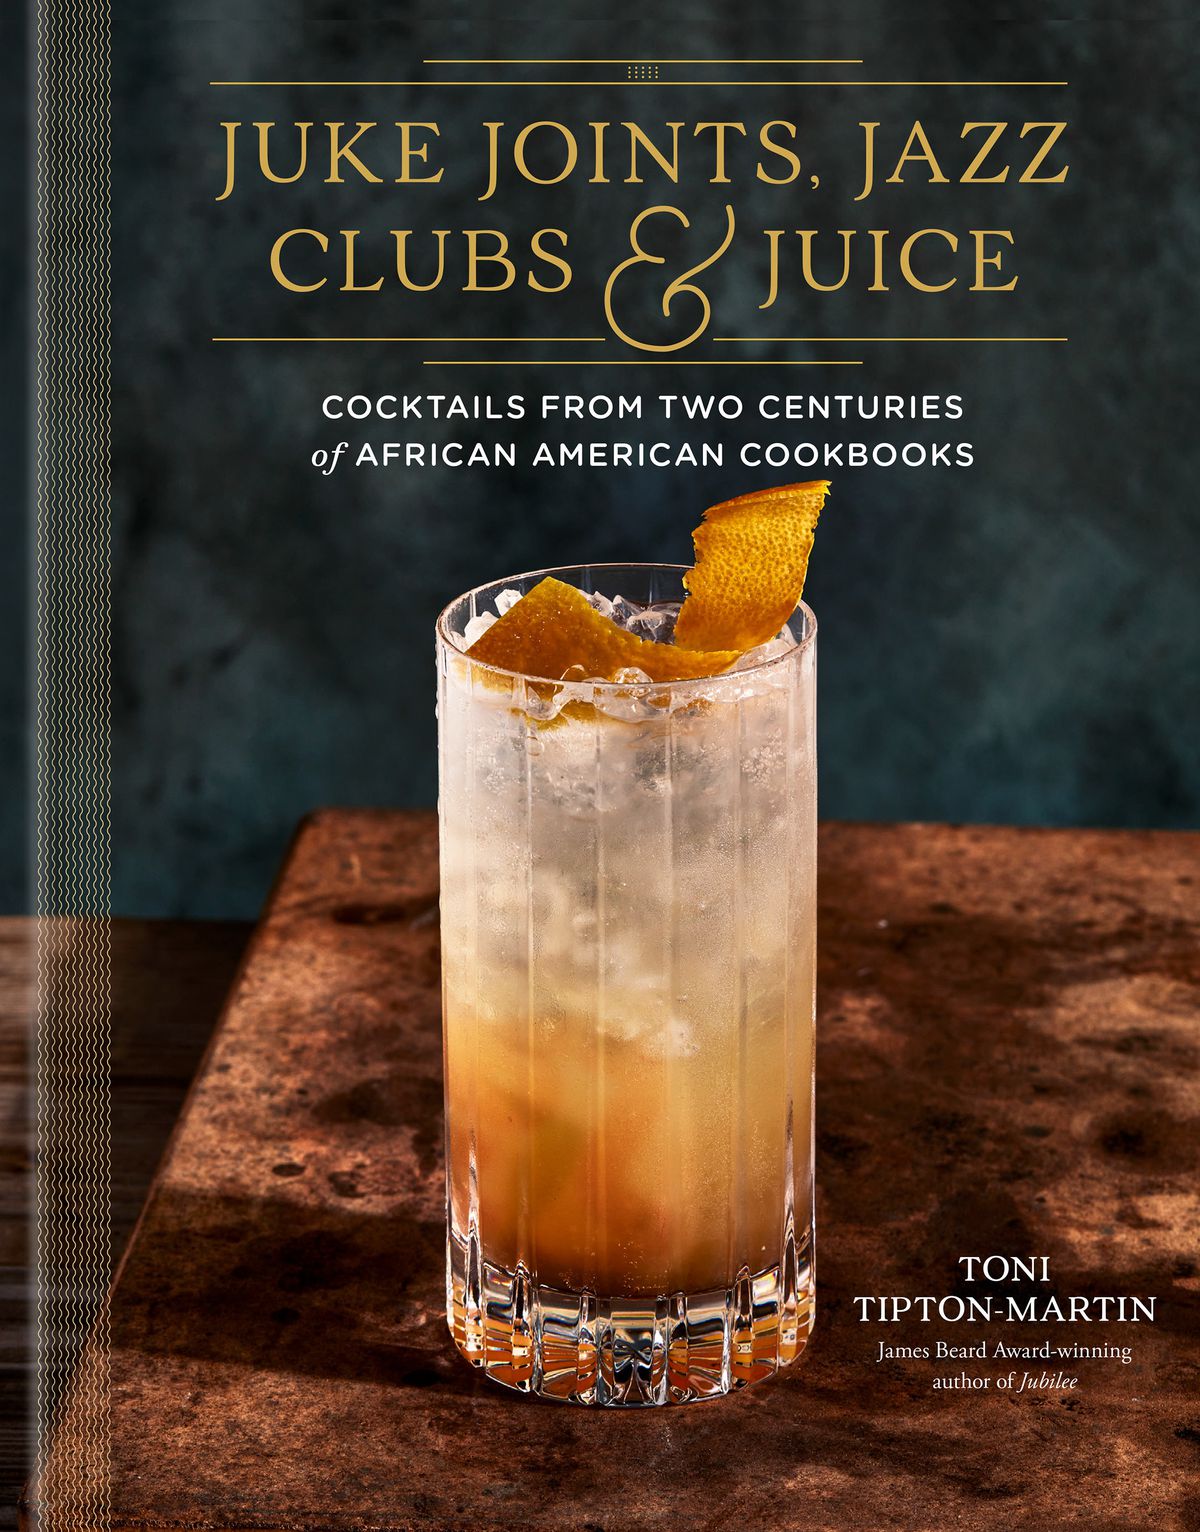 The cover of Toni Tipton-Martin’s Juke Joints, Jazz Clubs, and Juice